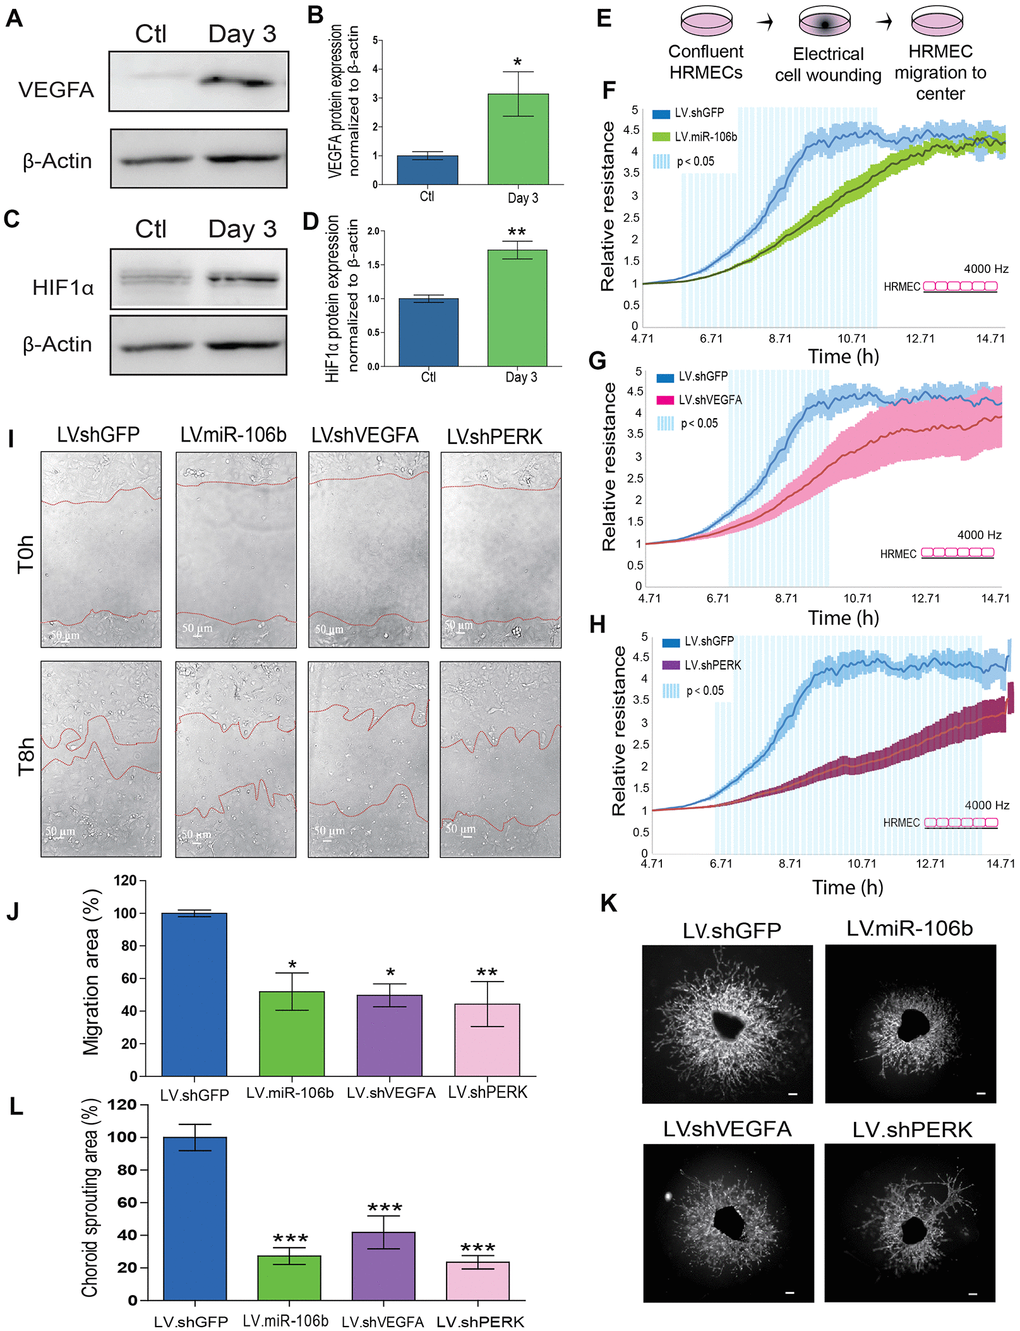 miR-106b exerts an anti-angiogenic effect and impairs retinal endothelial cell migration. (A) Western blot of VEGFA and β-actin from control choroids and 3 days after burns, and (B) quantification (n=4). (C) Western blot of HIF1α and β-actin from control choroids and 3 days after burns, and (D) quantification (n=4). (E) Schematic of ECIS cell migration assay procedure. HRMEC ECIS with (F) LV.miR-106b (n=4), (G) LV.shVEGFA (n=4) and (H) LV.shPERK (n=4) compared to LV.shGFP control. (I) HRMEC scratch assay infected 72h with LV.shGFP, LV.miR-106b, LV.shVEGFA and LV.shPERK at T0h and after 8h. (J) Migration area quantification of scratch assay with LV.miR-106b (n=4), LV.shVEGFA (n=4), and LV.shPERK (n=4) compared to LV.shGFP. (K) Sprouting assay with choroid explants infected with LV.shGFP, LV.miR-106b, LV.shVEGFA, and LV.shPERK. (L) Sprouting area quantification with LV.miR-106b (n=9), LV.shVEGFA (n=9), LV.shPERK (n=8) compared to LV.shGFP control. Scale bar = 500 μm. Data are expressed as mean ± S.E.M. Unpaired Two-tailed Student’s t-test was used for the analysis of groups of 2, and one-way ANOVA with Bonferroni post-hoc test was performed on groups of 3 or more, *P 